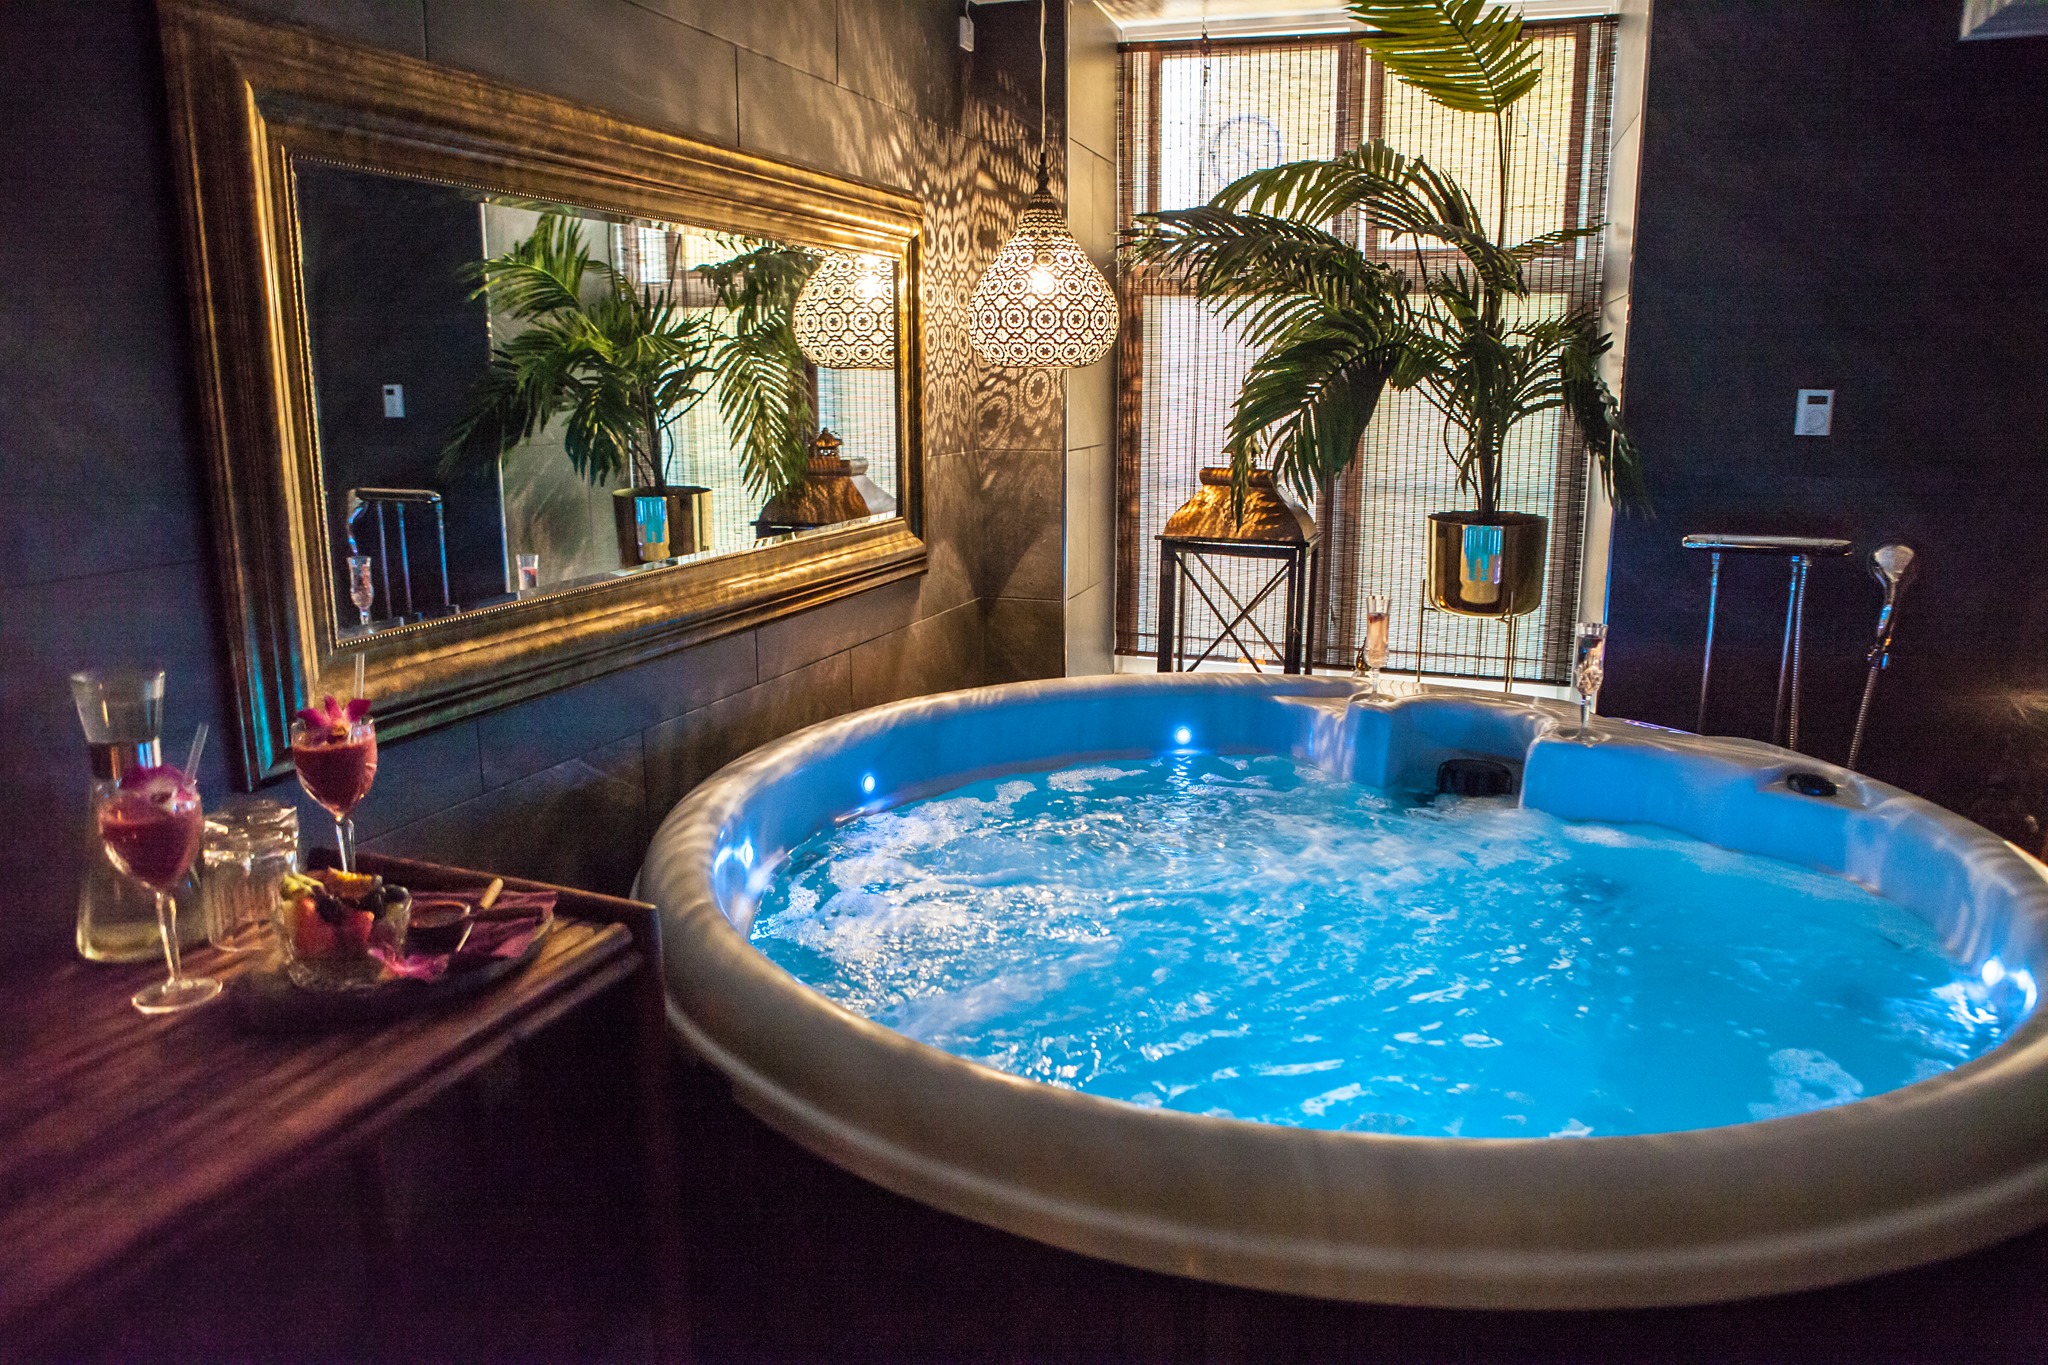 A photo of an inside Jacuzzi at Samadhi Spa | The Best 5 Spas in Copenhagen | Amitylux Tours | Scandinavian Guided Tours | VIP & Luxury Experiences in the Nordics